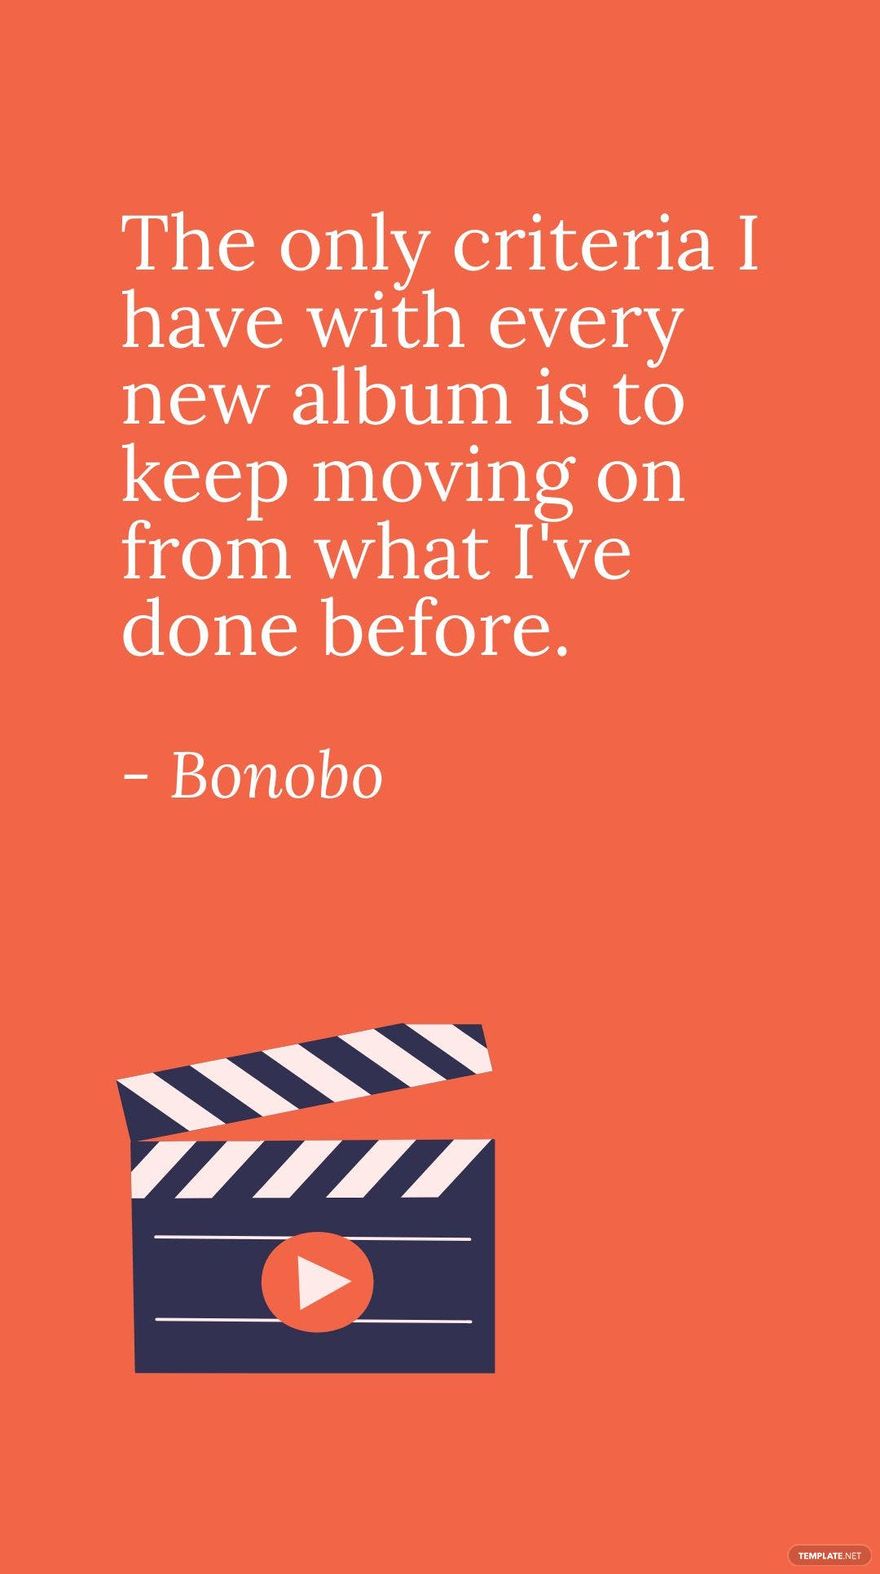 Bonobo - The only criteria I have with every new album is to keep moving on from what I've done before.